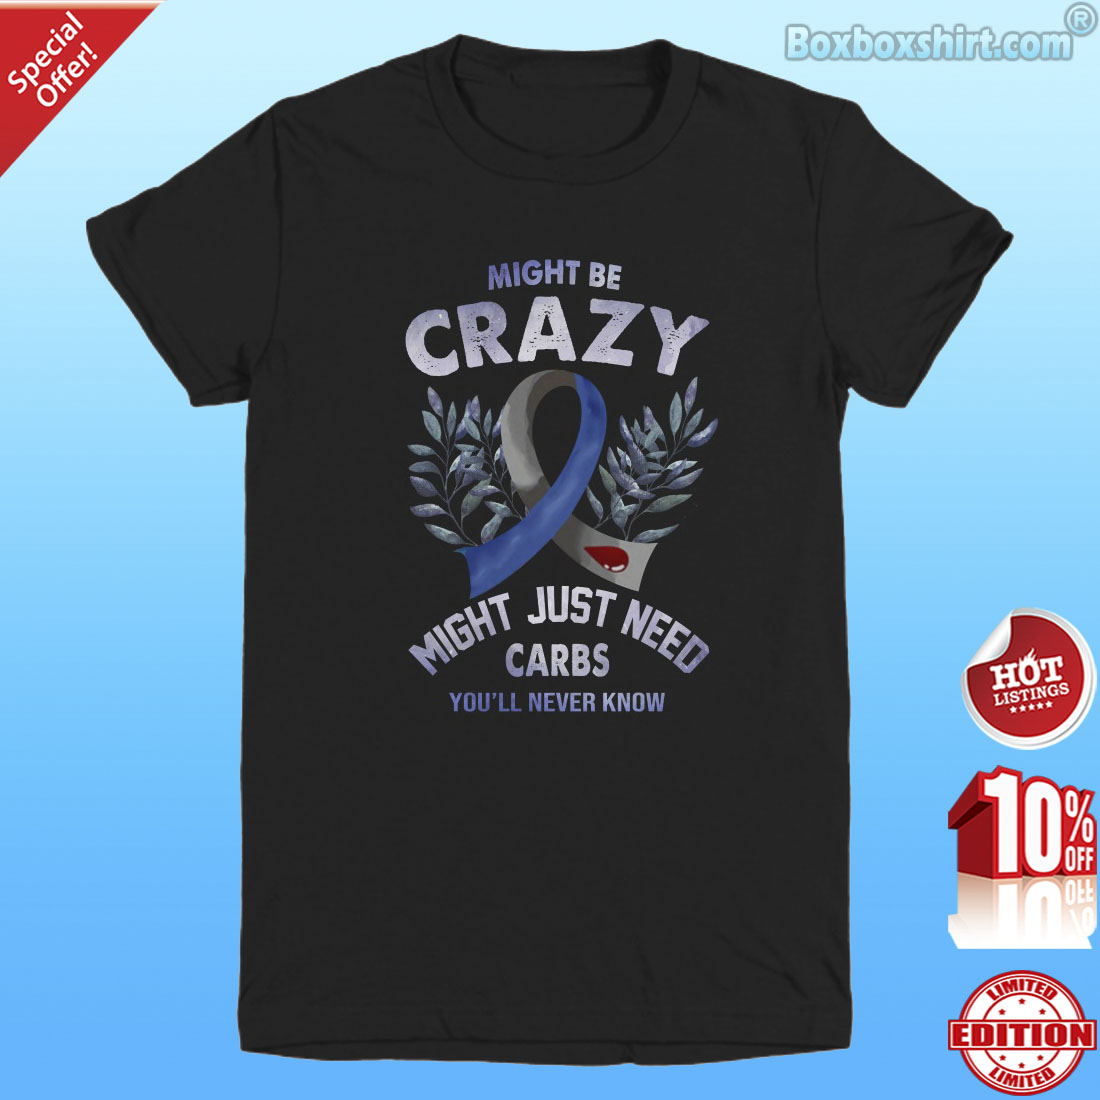 Might be crazy might just need carbs you'll never know shirt